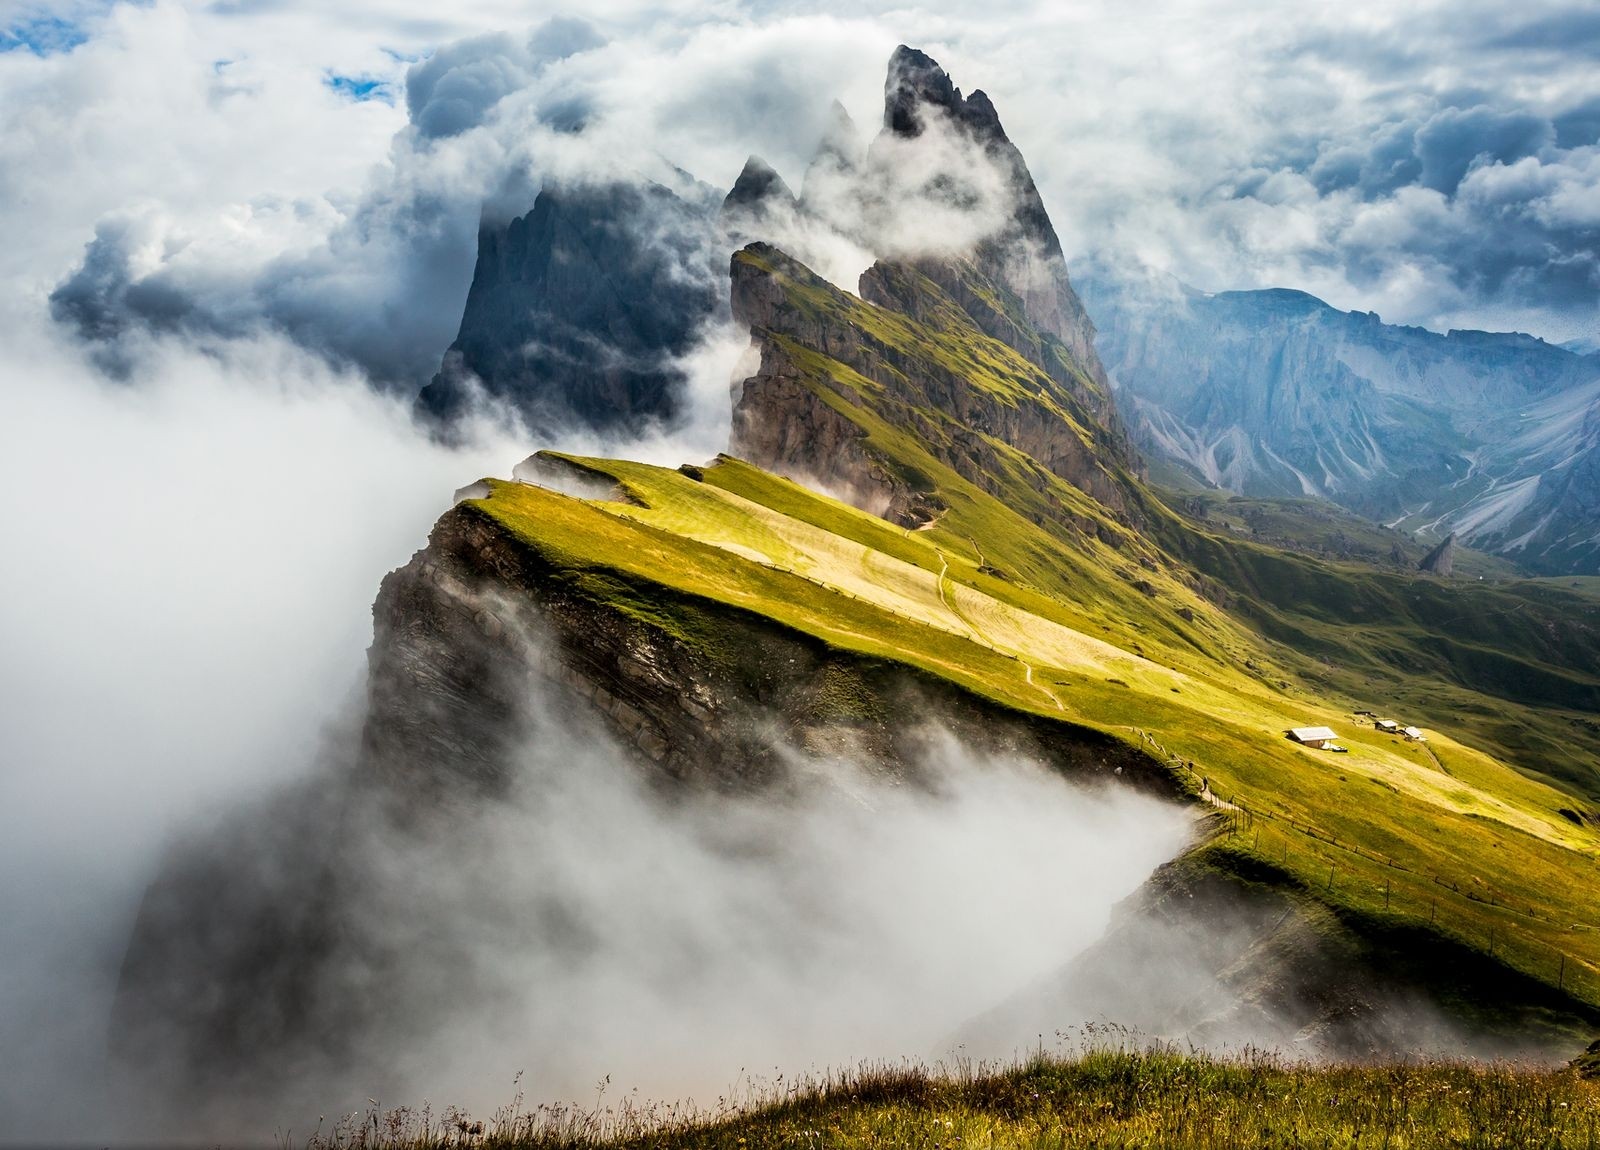 General 1600x1150 nature photography landscape mountains clouds grass cabin summit Alps Seiser Alm Italy Dolomites